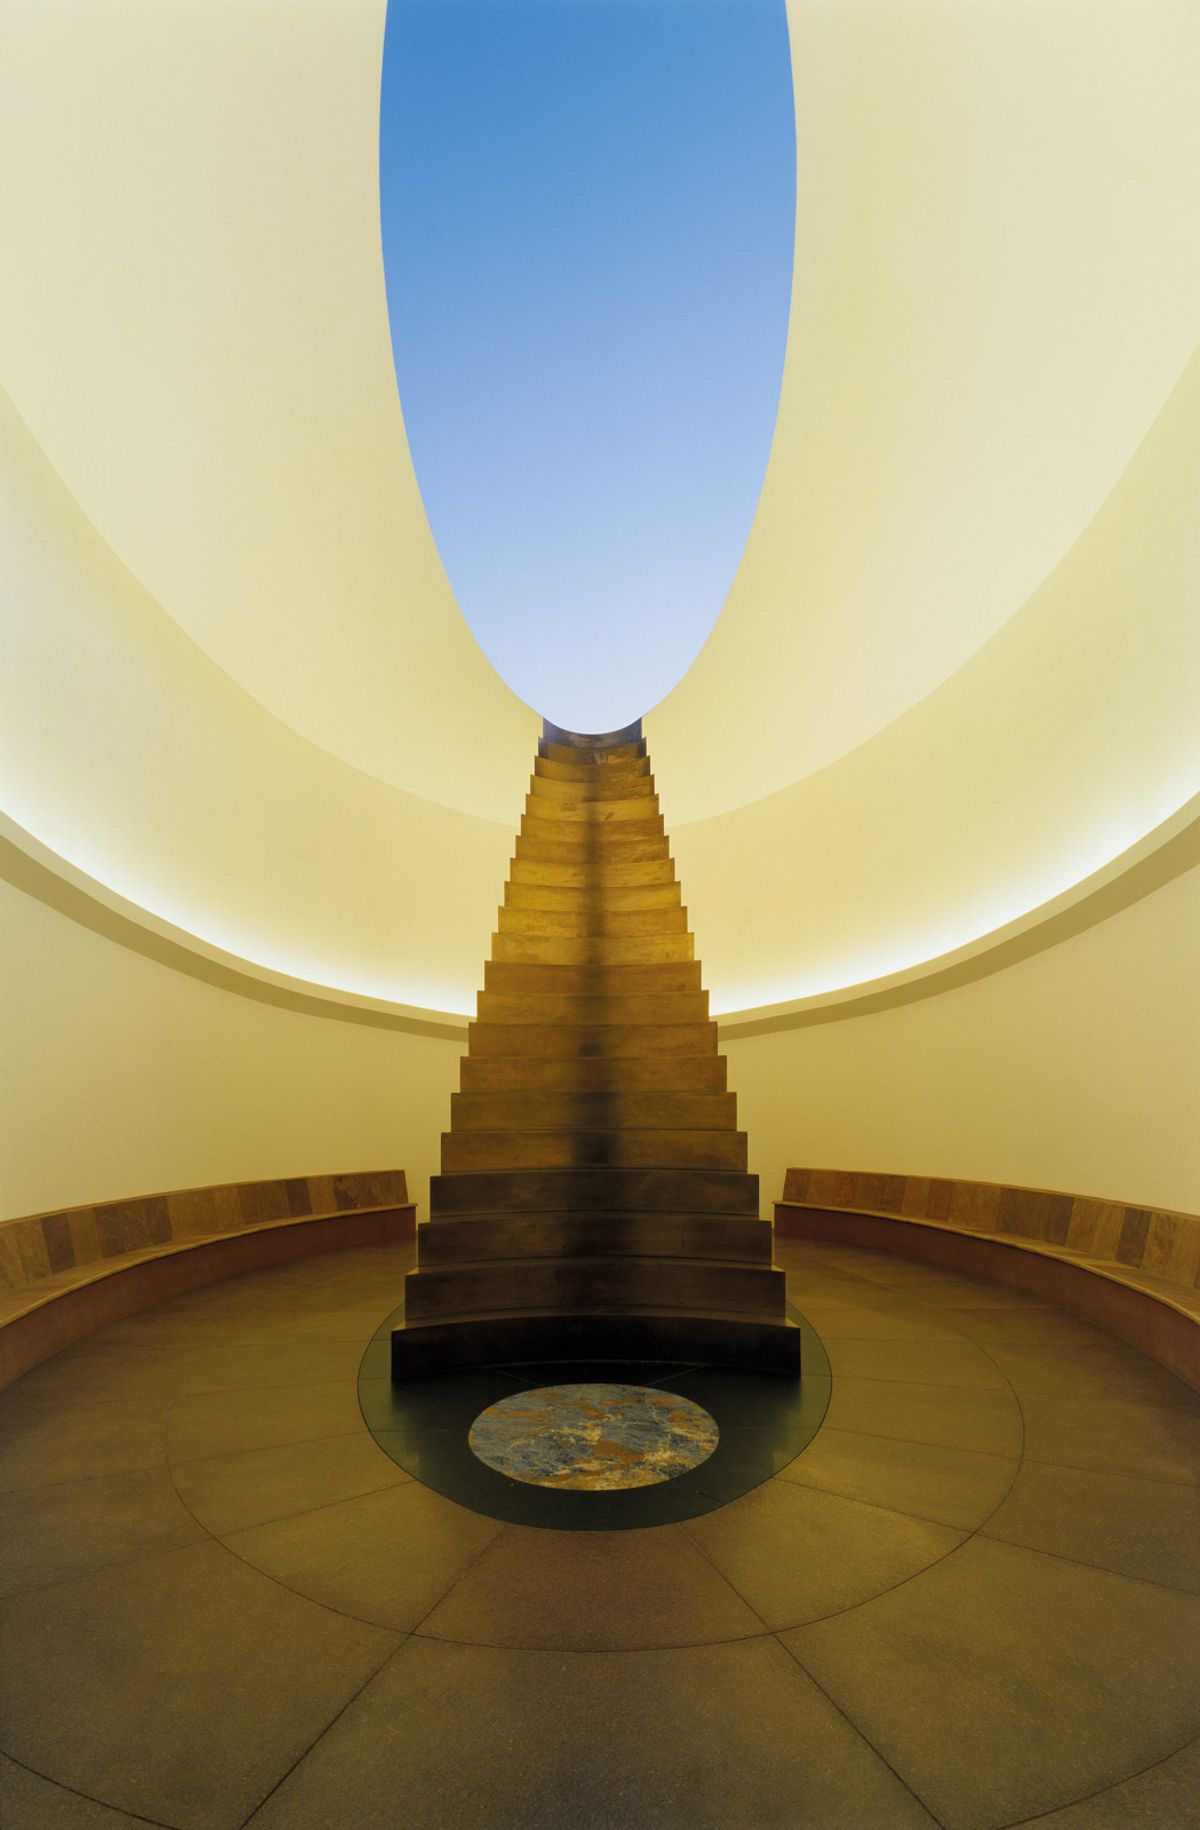 James Turrell has been working on Roden Crater for over 40 years Florian Holzherr; ©️James Turrell